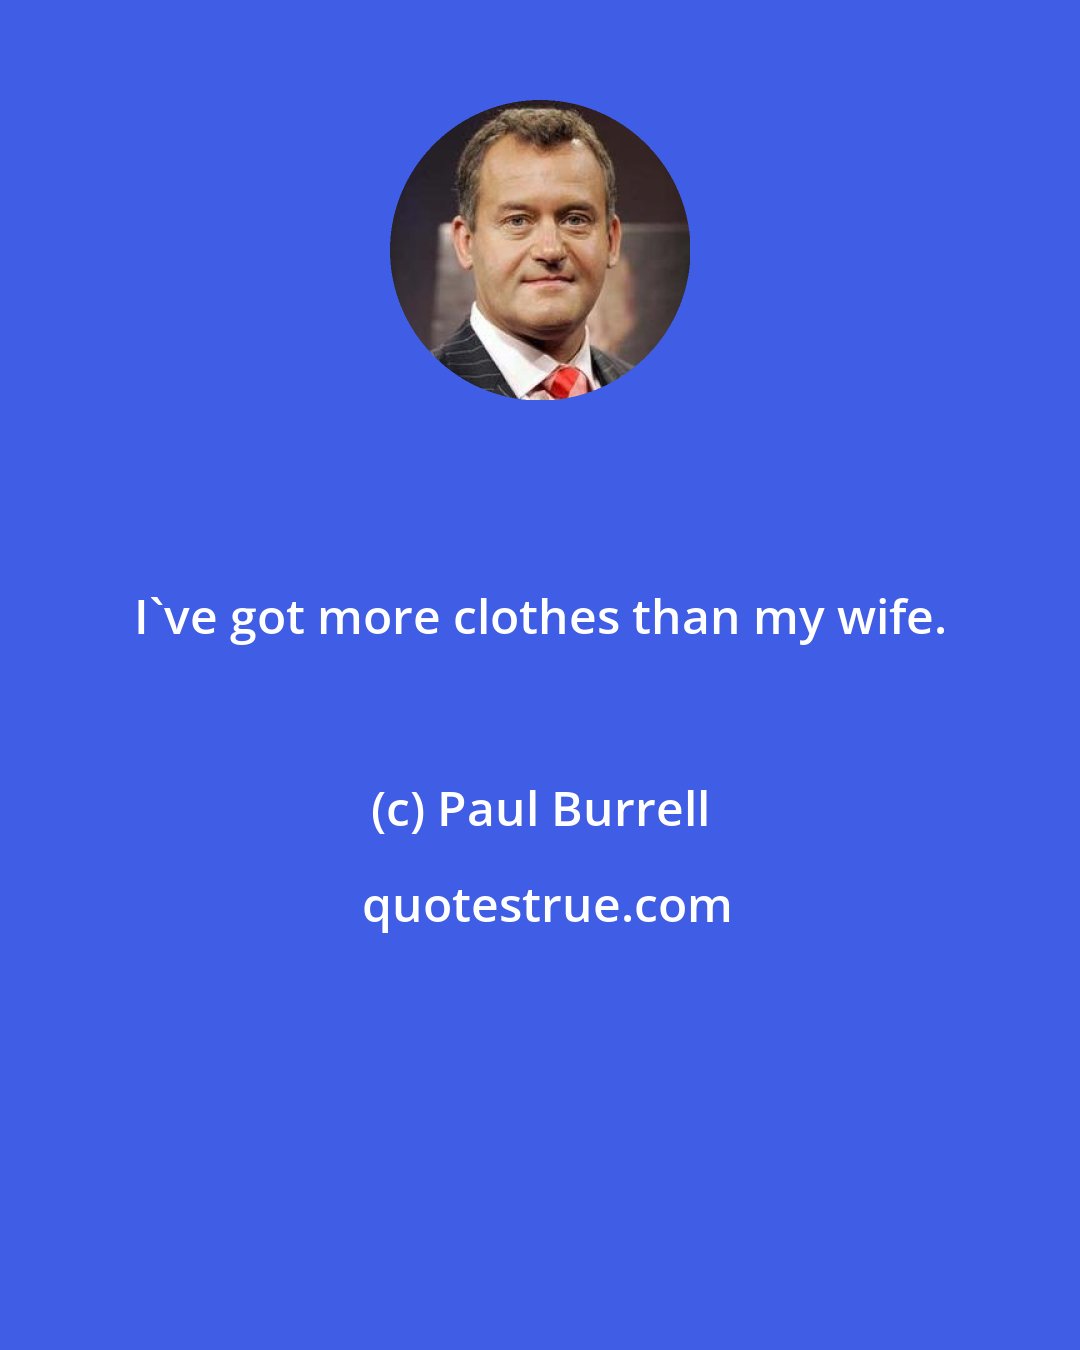 Paul Burrell: I've got more clothes than my wife.